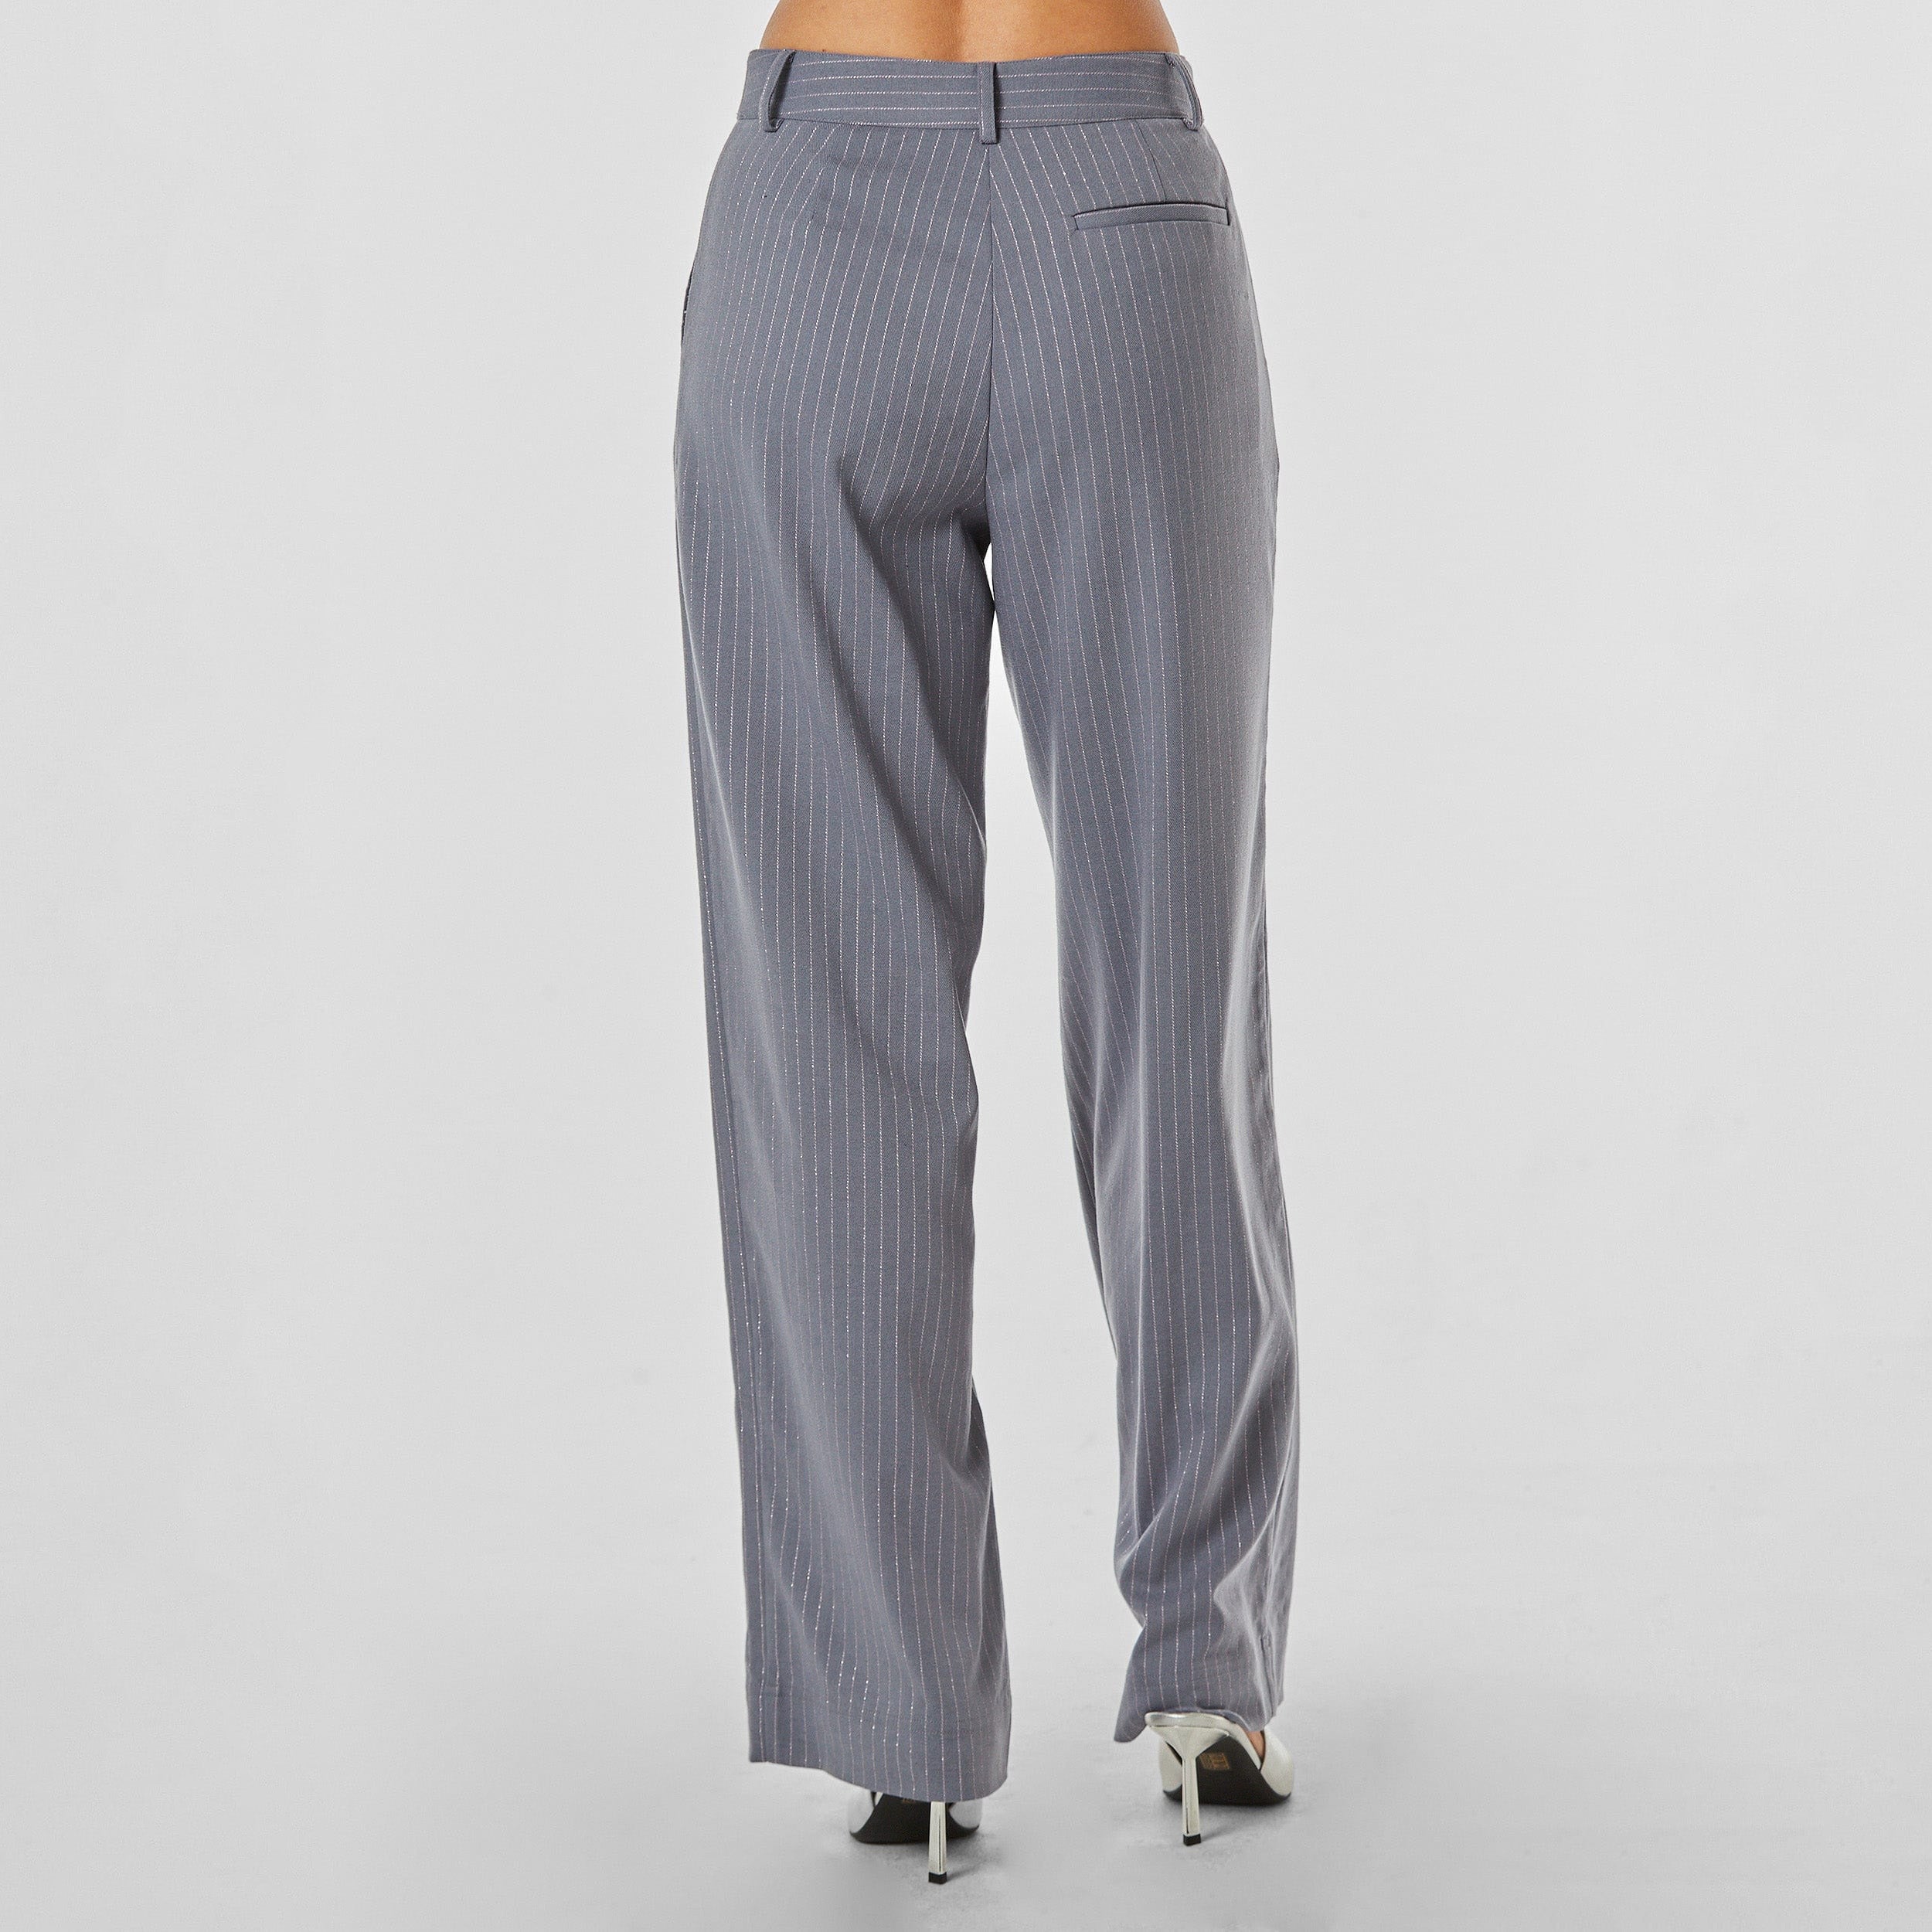 Rear view of woman wearing silver pinstripe on grey trouser with oversized fit